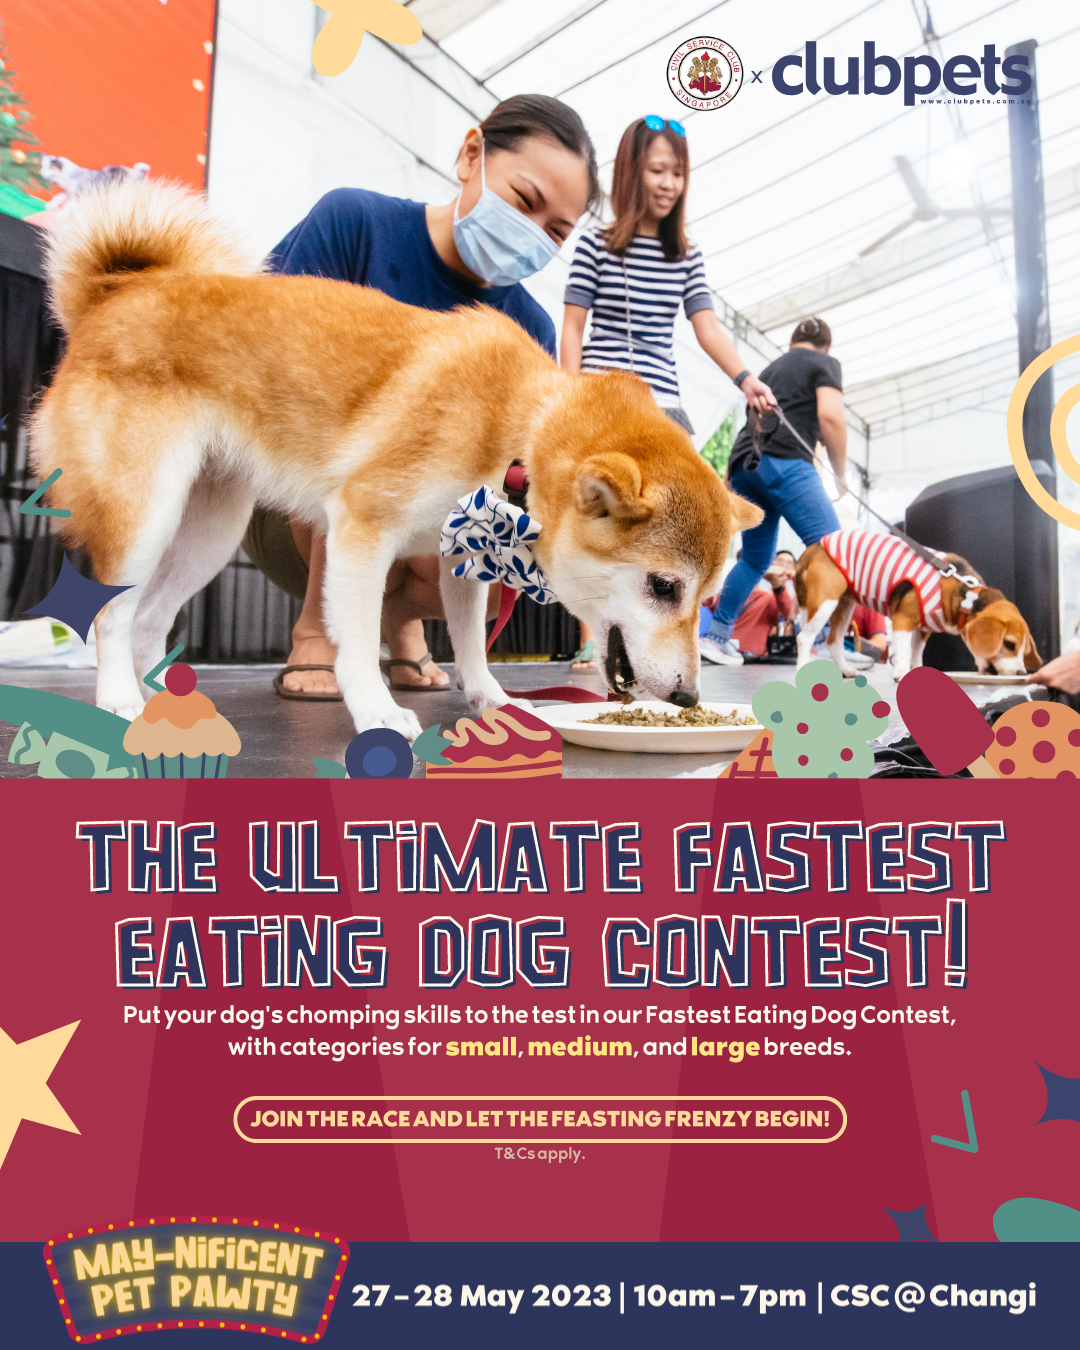 the ultimate fastest eating dog contest - may nificent pet pawty